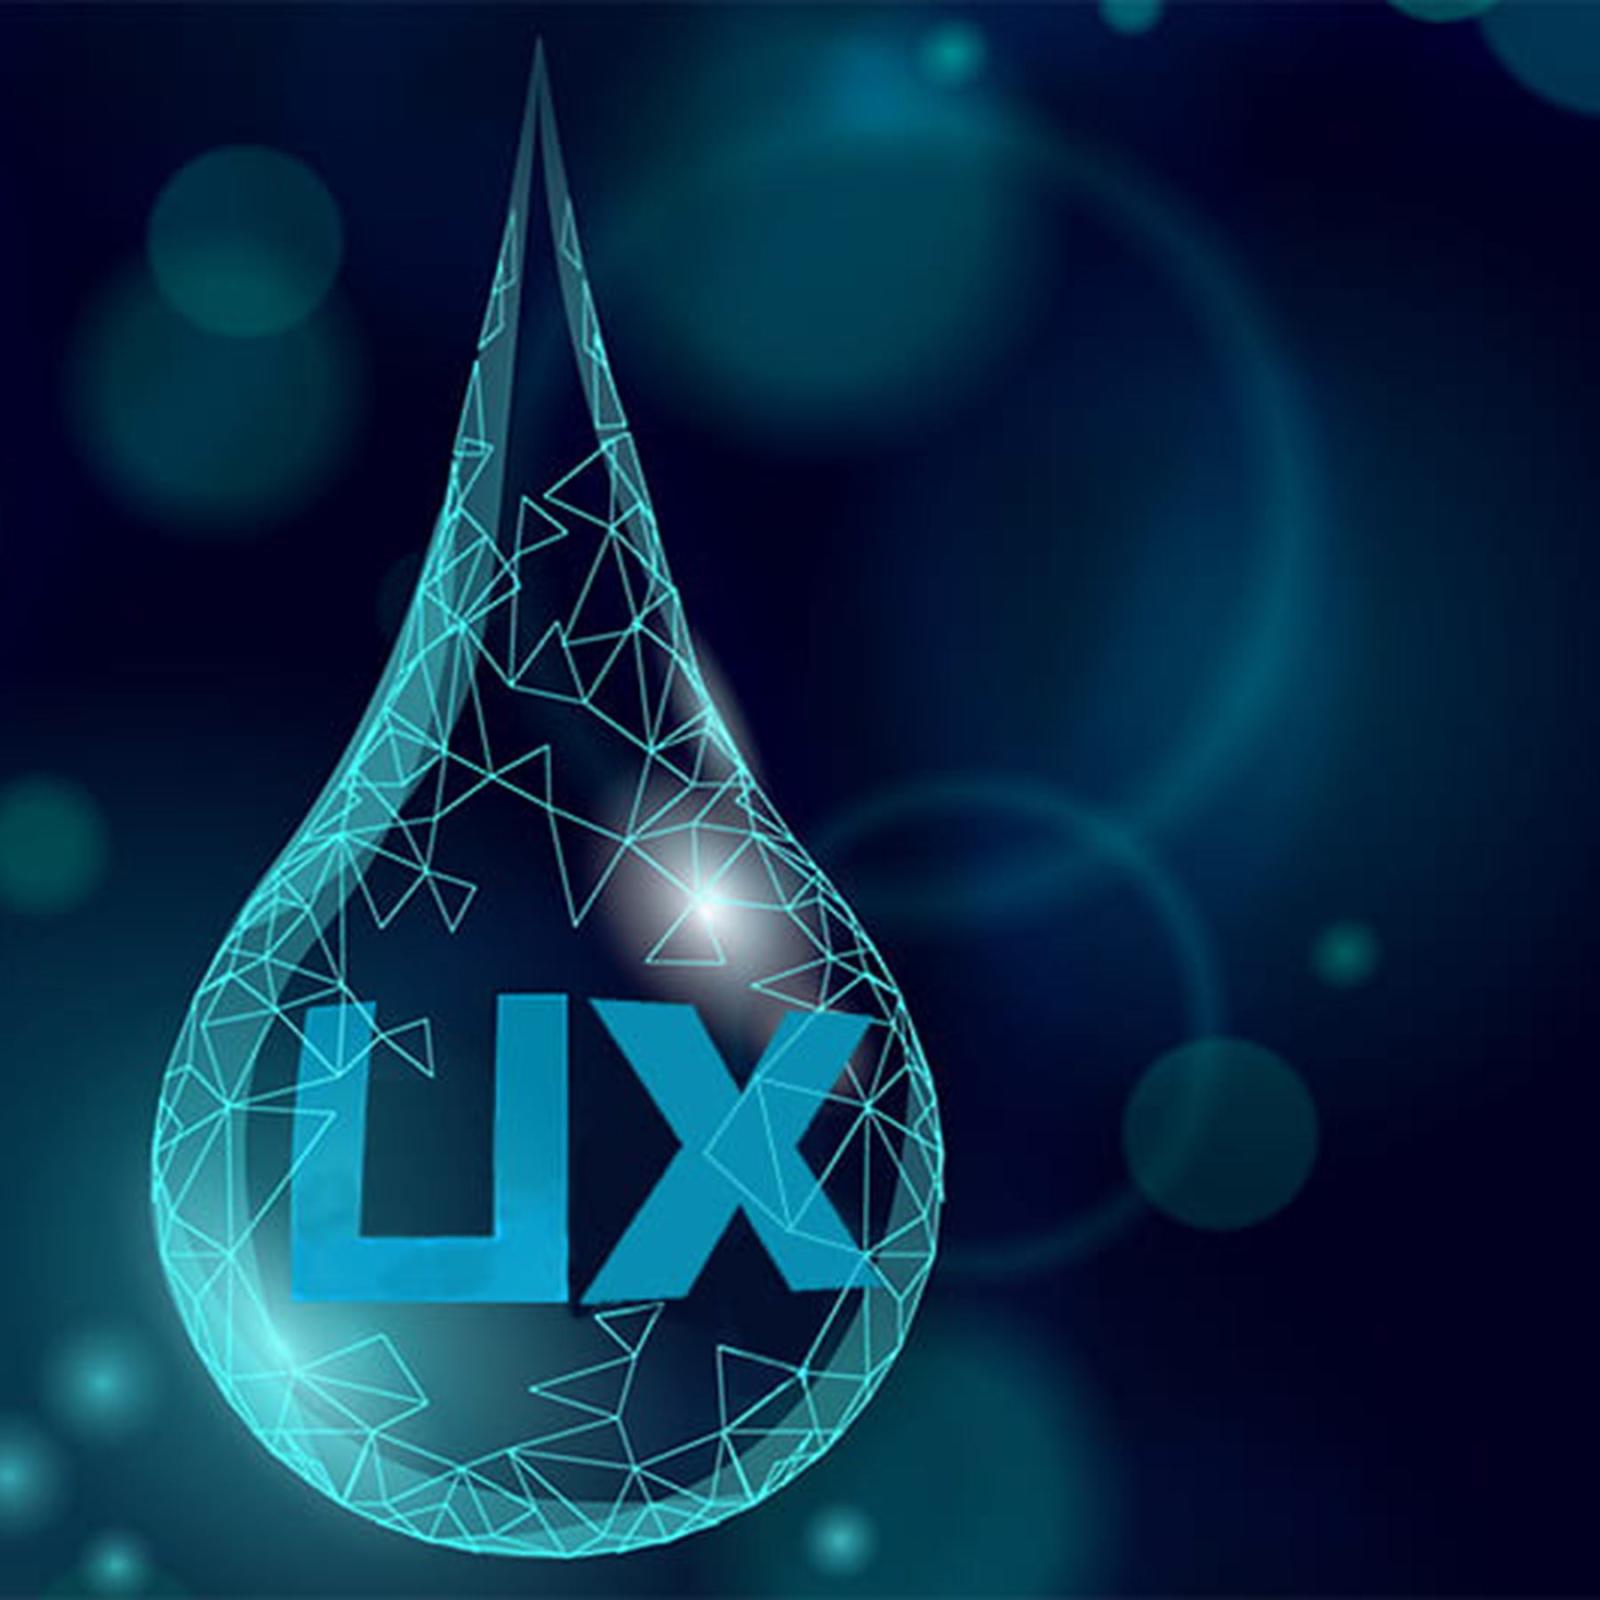 Image of a water drop with the word UX in it.